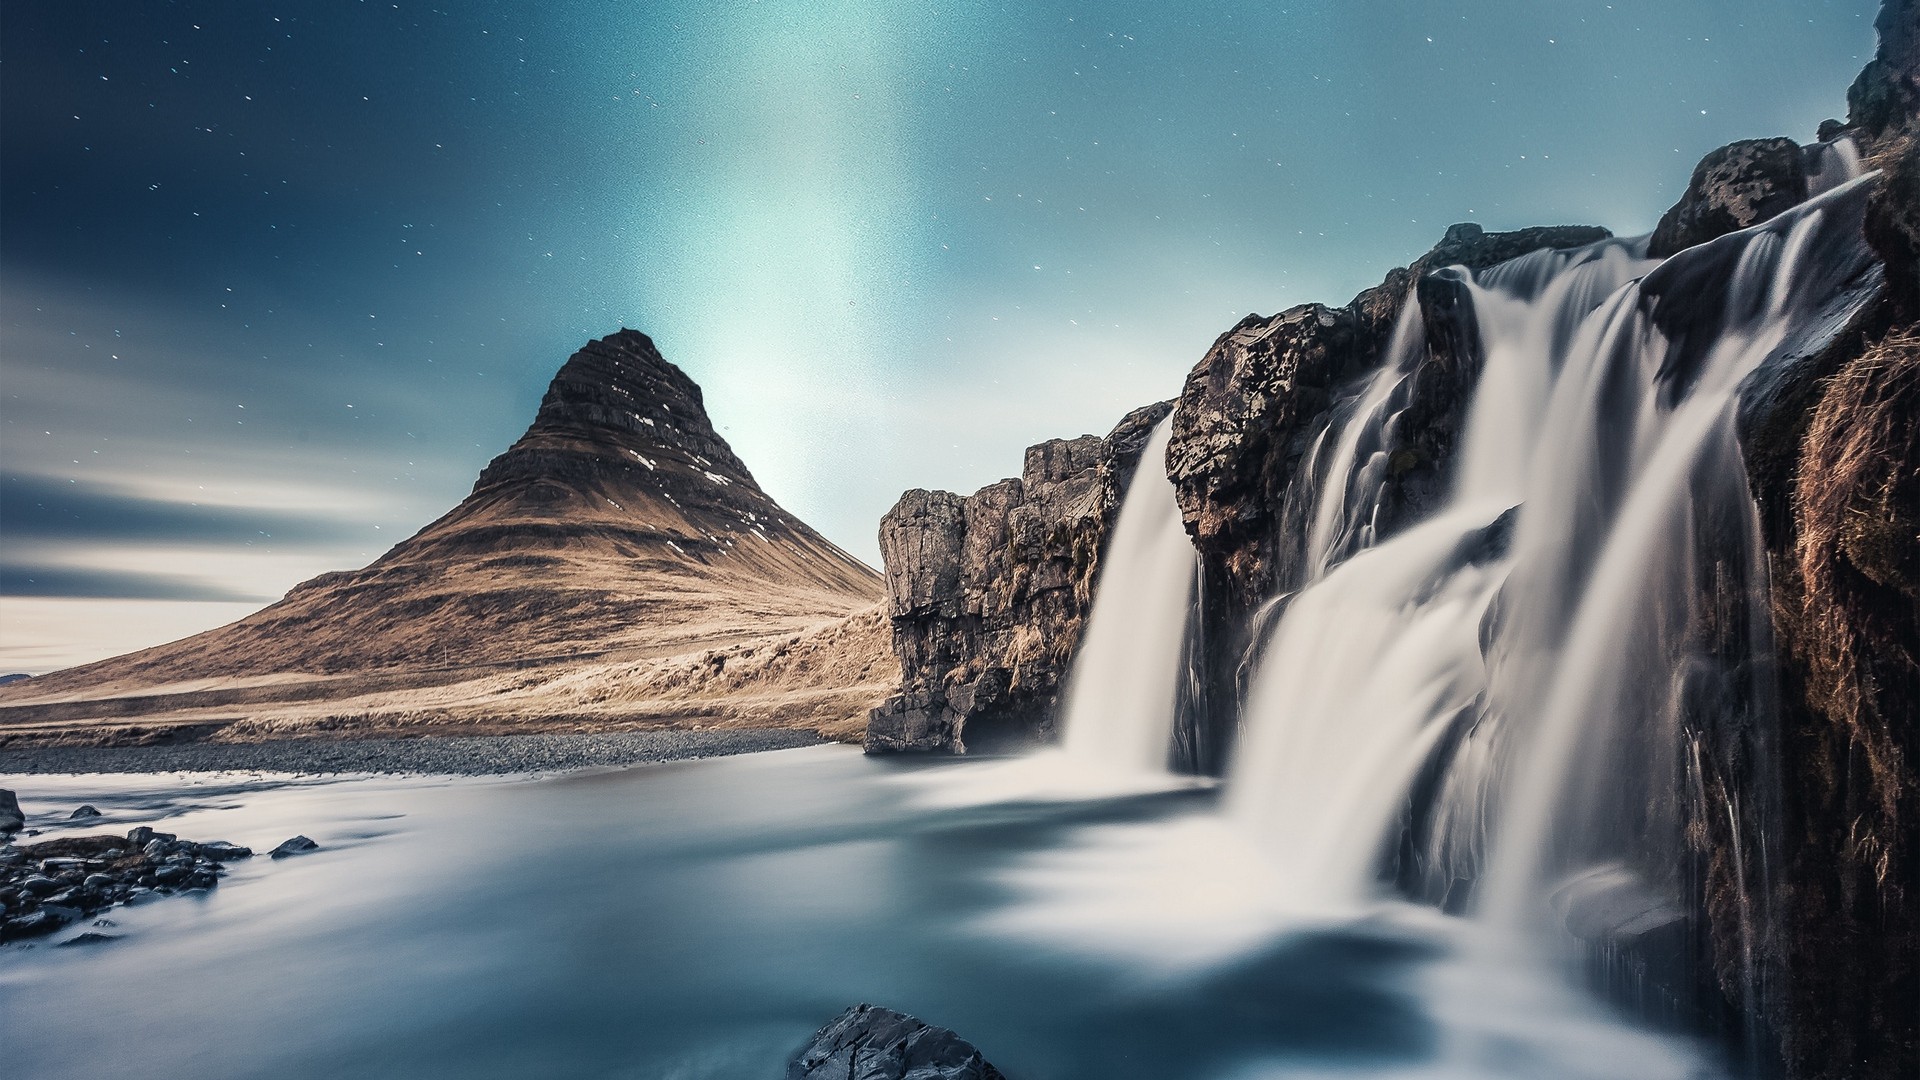 1920x1080 wallpapers: waterfall, mountain, river, sky (image)